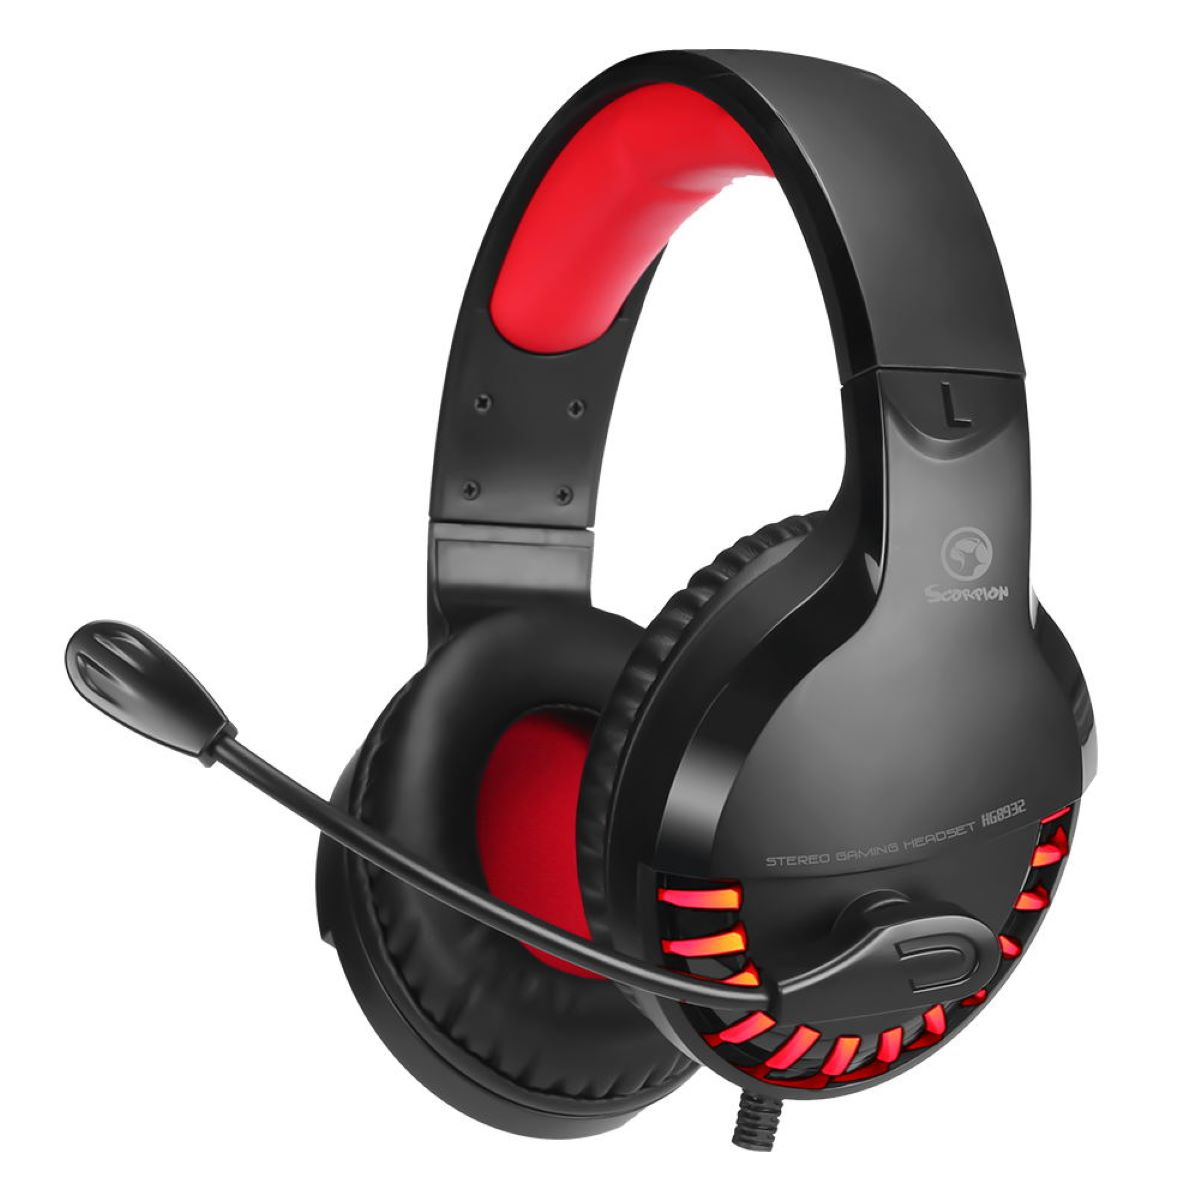 Headset MARVO Gaming Over-ear HG8932 Wired, schwarz/rot